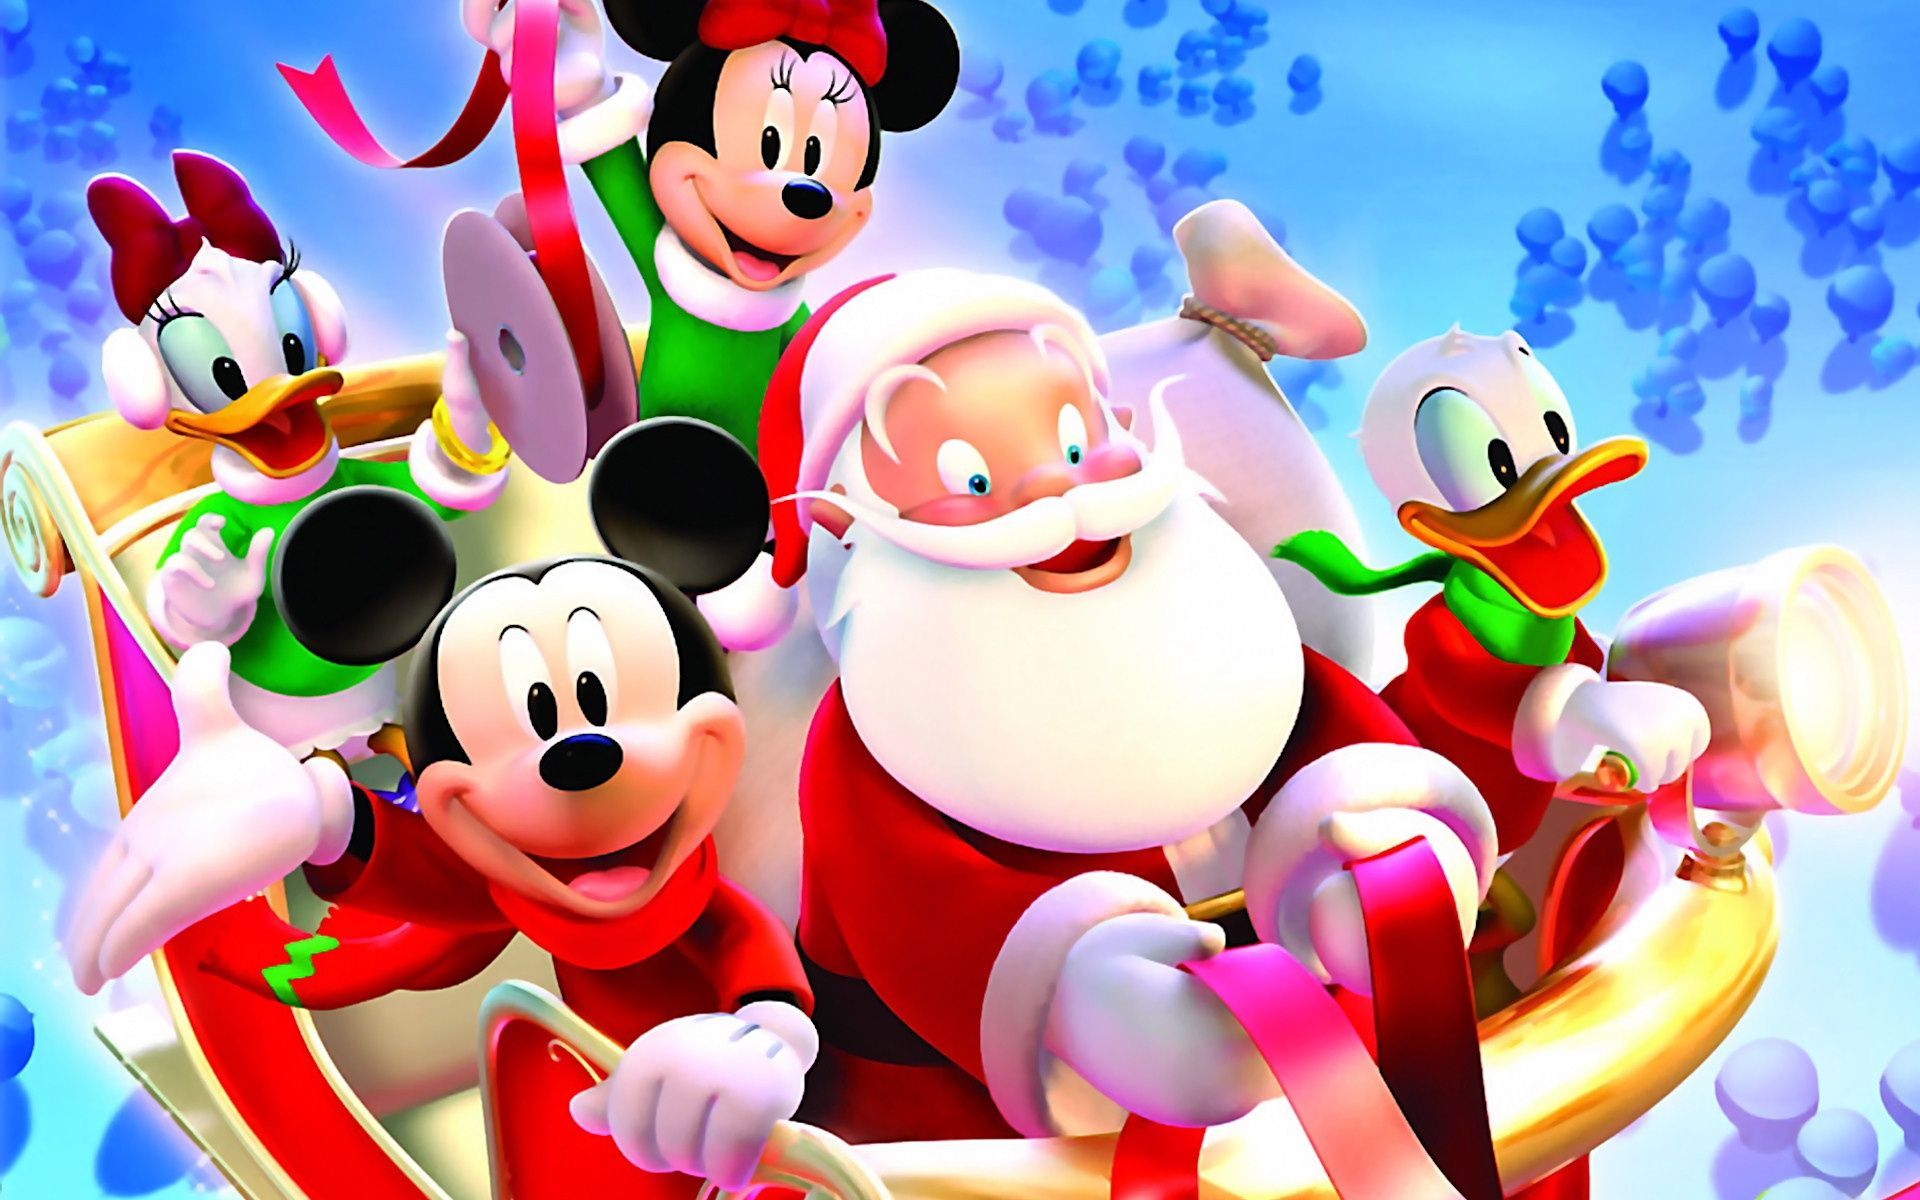 Disney Christmas Wallpapers Hd Mickey Mouse With Santa Claus.